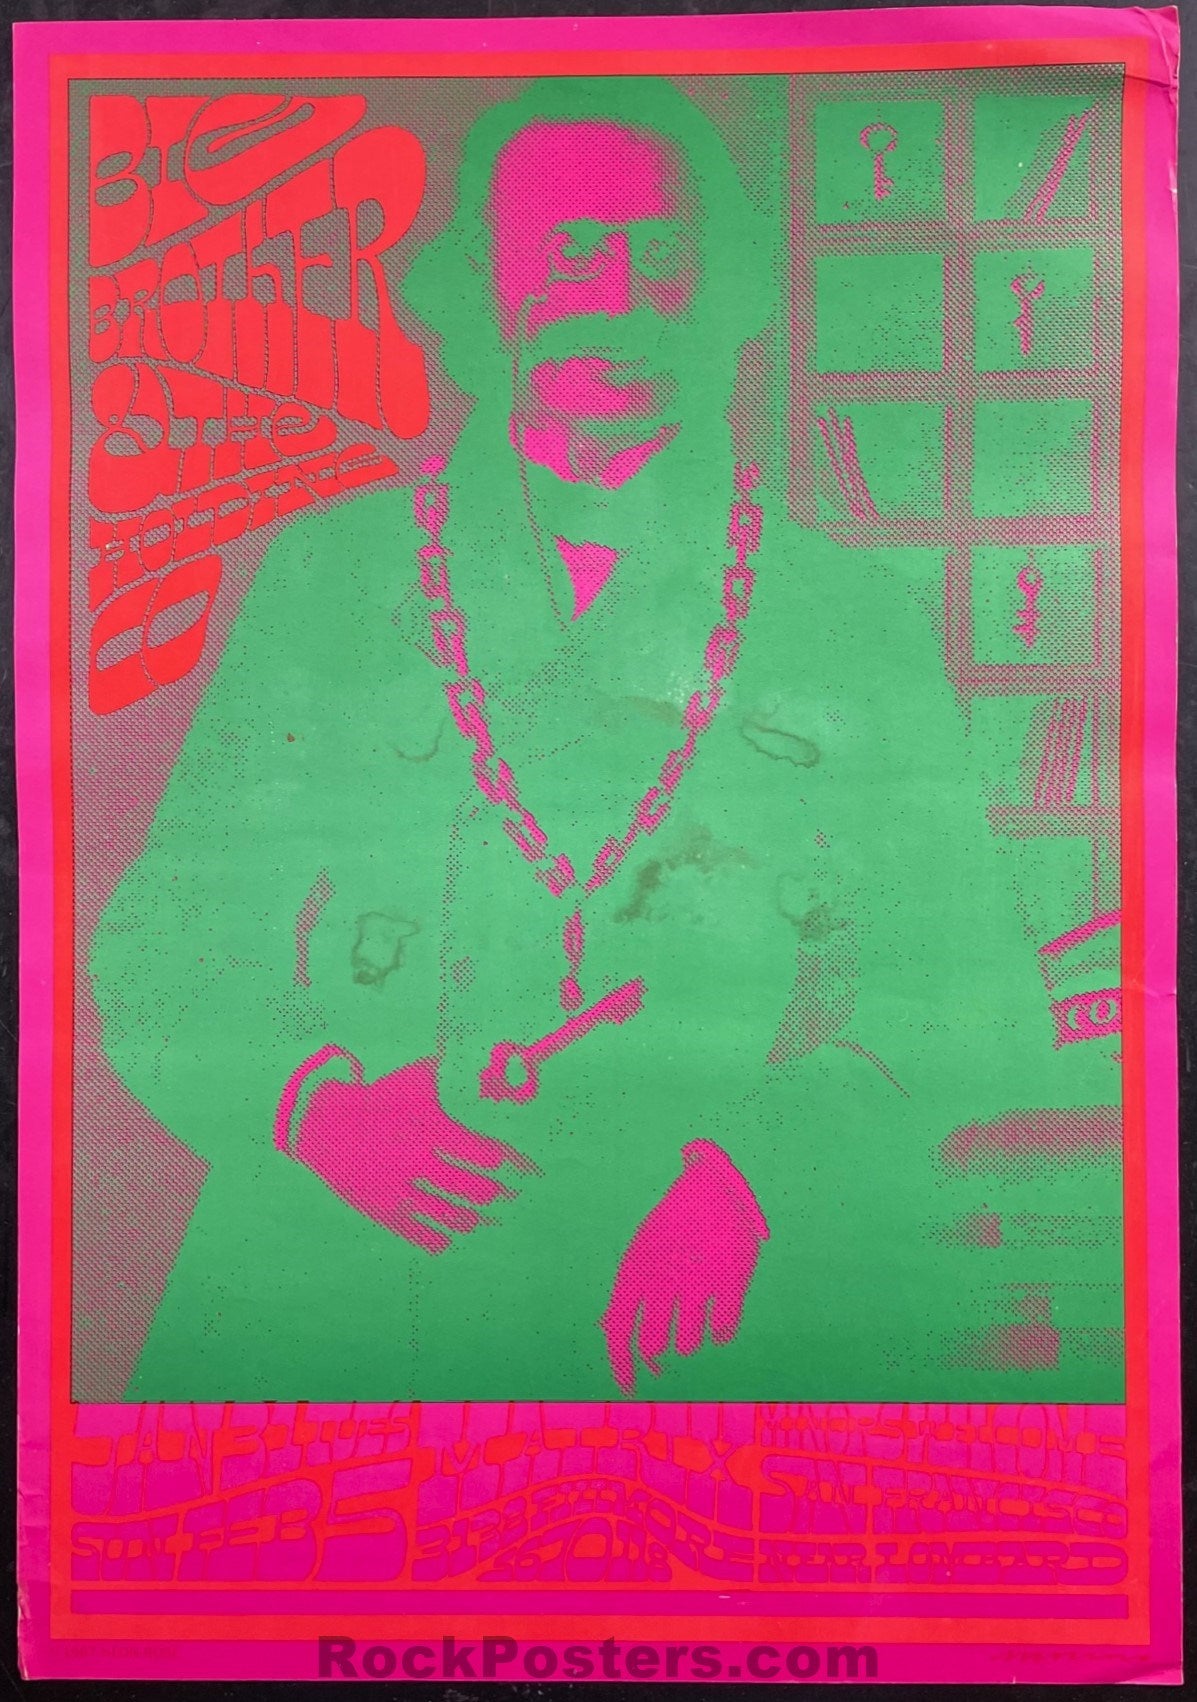 AUCTION - Neon Rose 4 - Big Brother Janis Joplin - Victor Moscoso -  Matrix - 1967 Poster - Very Good